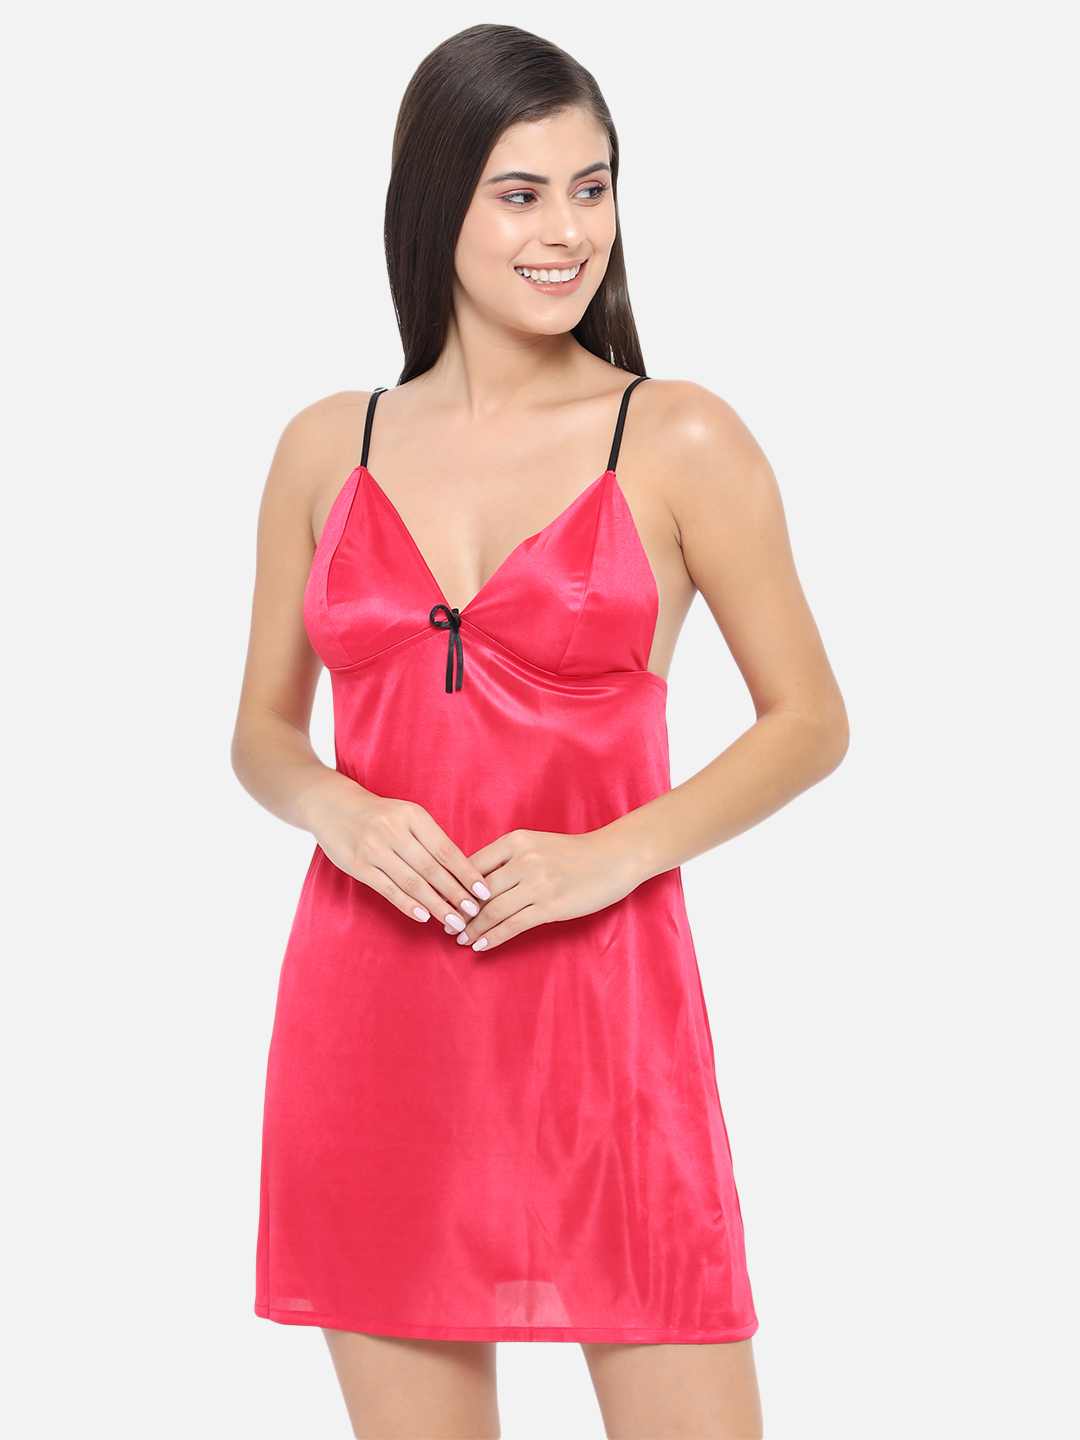 Freya Nightgown set - Private Lives